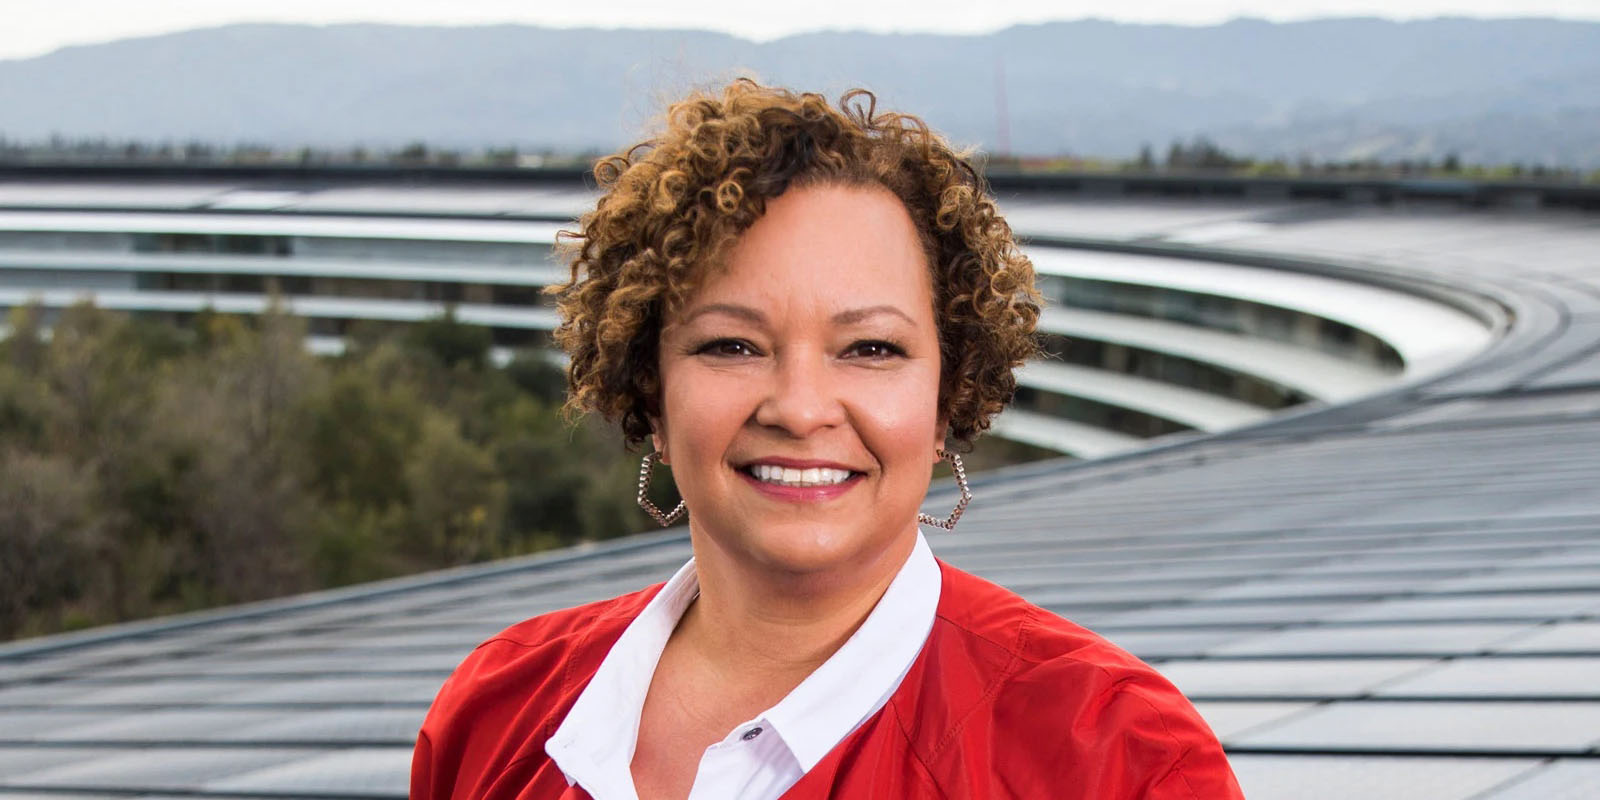 Apple environmental lead Lisa Jackson pictured on the roof of Apple Park | Women in tech report shows that Apple's leadership is now a little ahead of the curve